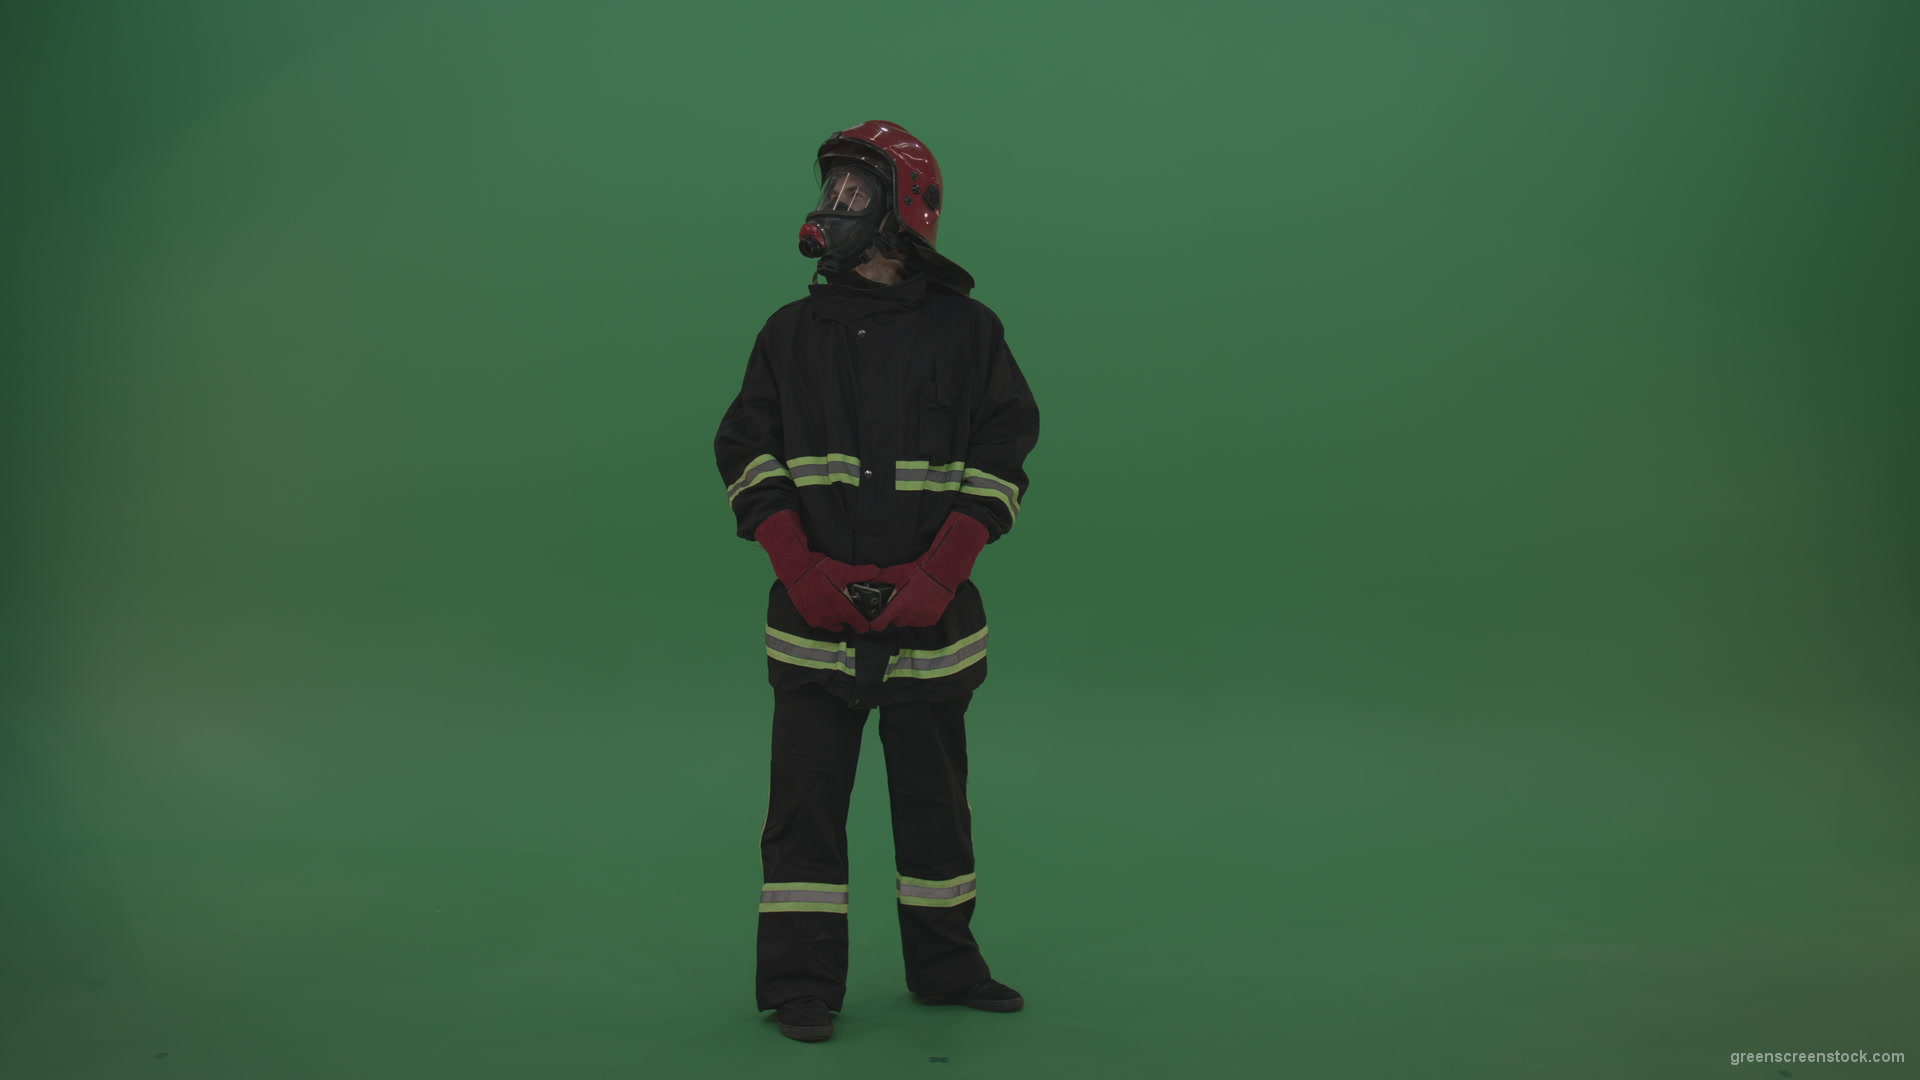 Young_Firefighter_Wearing_Full_FIreman_Working_Kit_Looking_Around_To_Fing_Some_Fire_Arson_Problems_On_Green_Screen_Wall_Background_004 Green Screen Stock